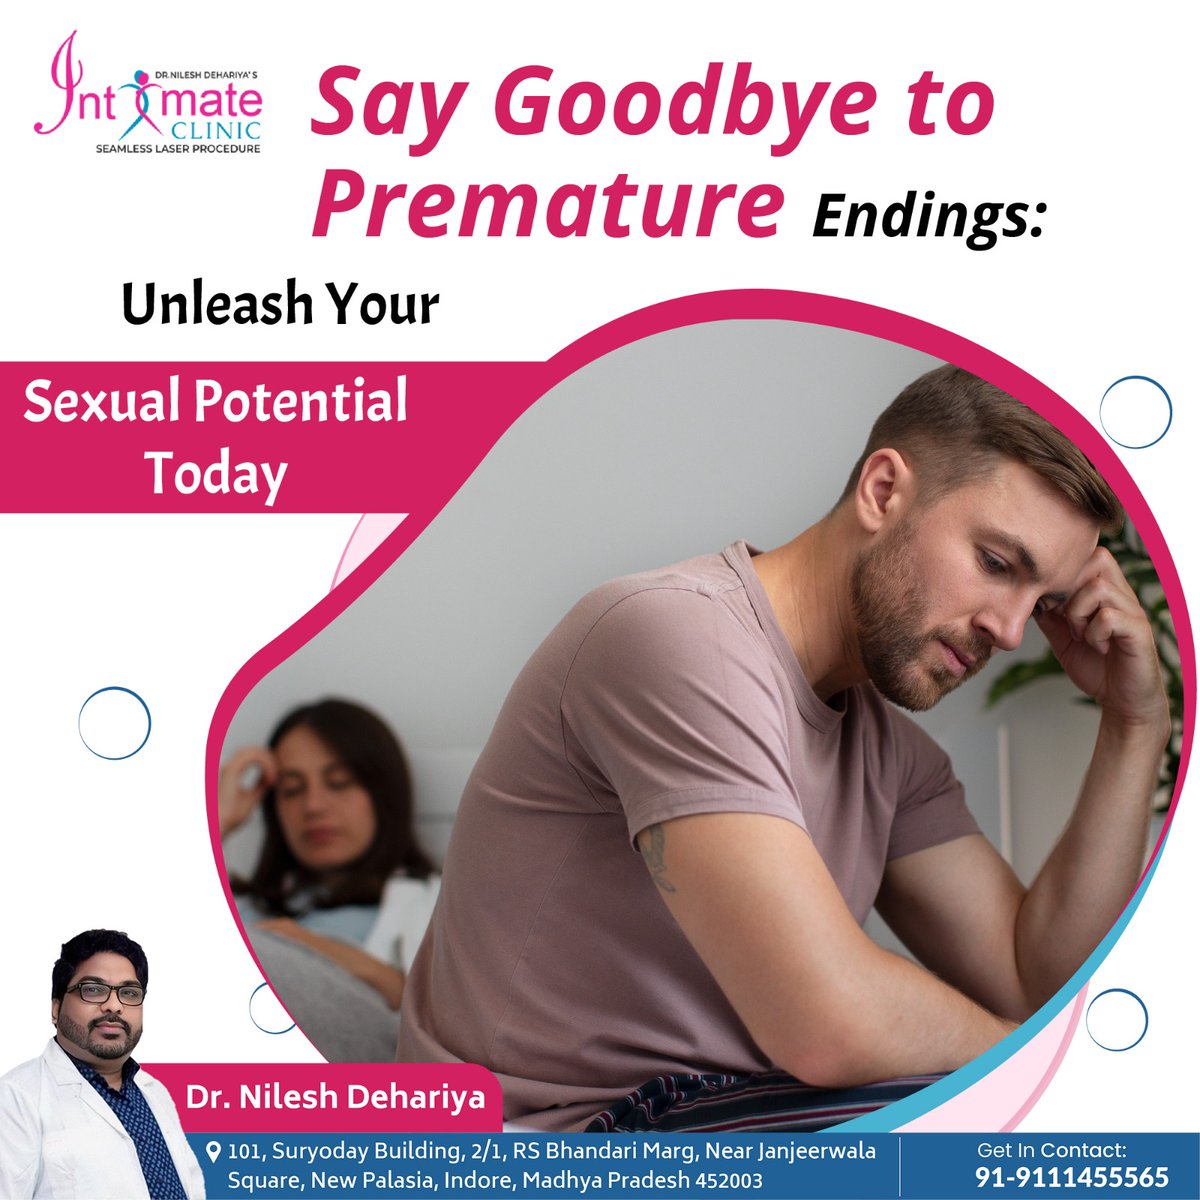 Say Goodbye to Premature Endings:
Unleash Your Sexual Potential Today
.
intimateclinic.in
.
#PrematureEjaculation #PEAwareness #SexualHealth #Intimacy #PETreatment #PEManagement #LastingLonger #PESupport #PerformanceAnxiety #SexualWellness #drnileshdehariya #indore